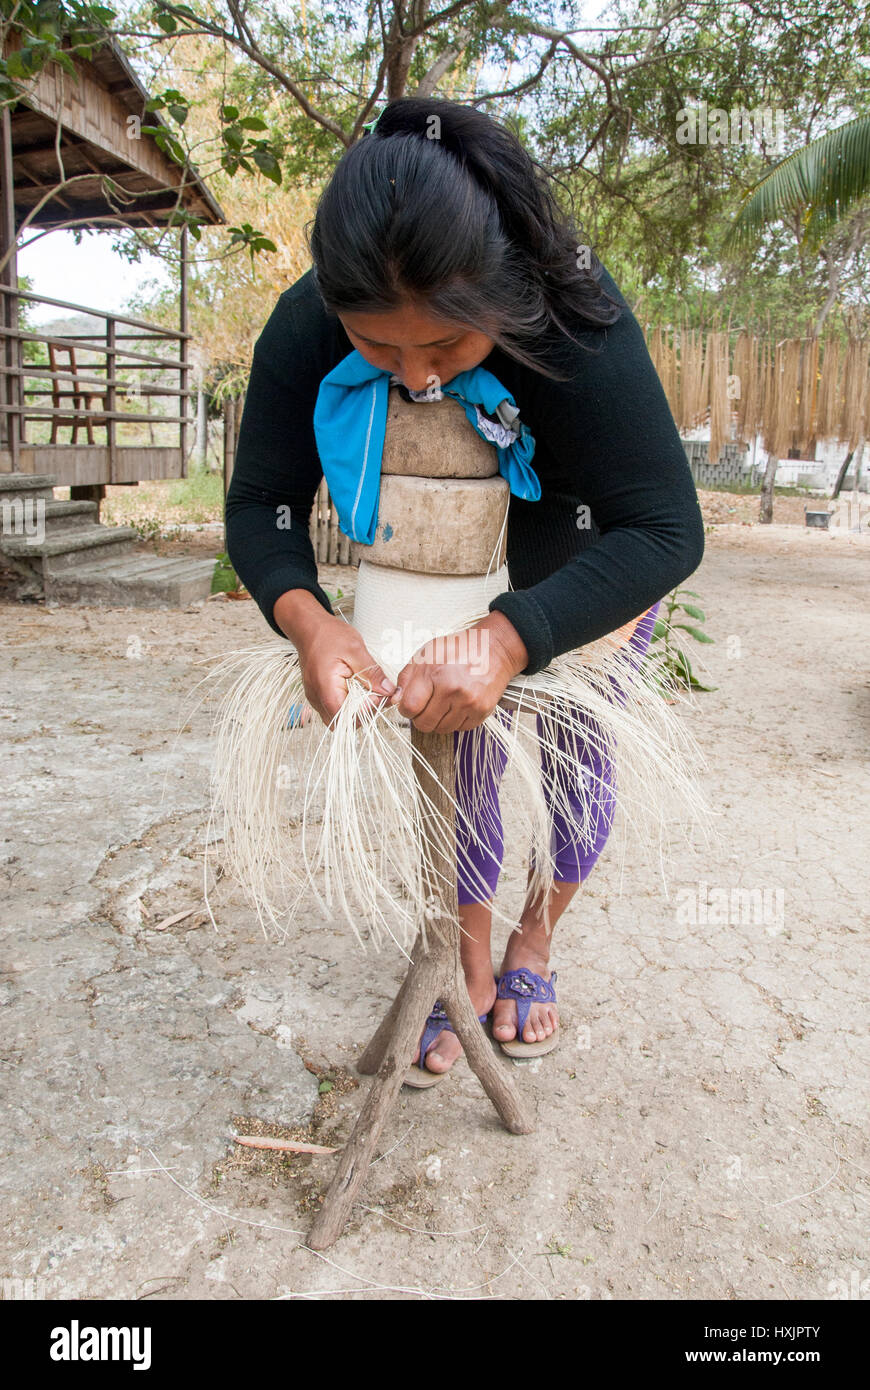 Traditional Weaving Of Ecuadorian Toquilla Straw Hats - UNESCO Intangible Cultural Heritage of Humanity Stock Photo